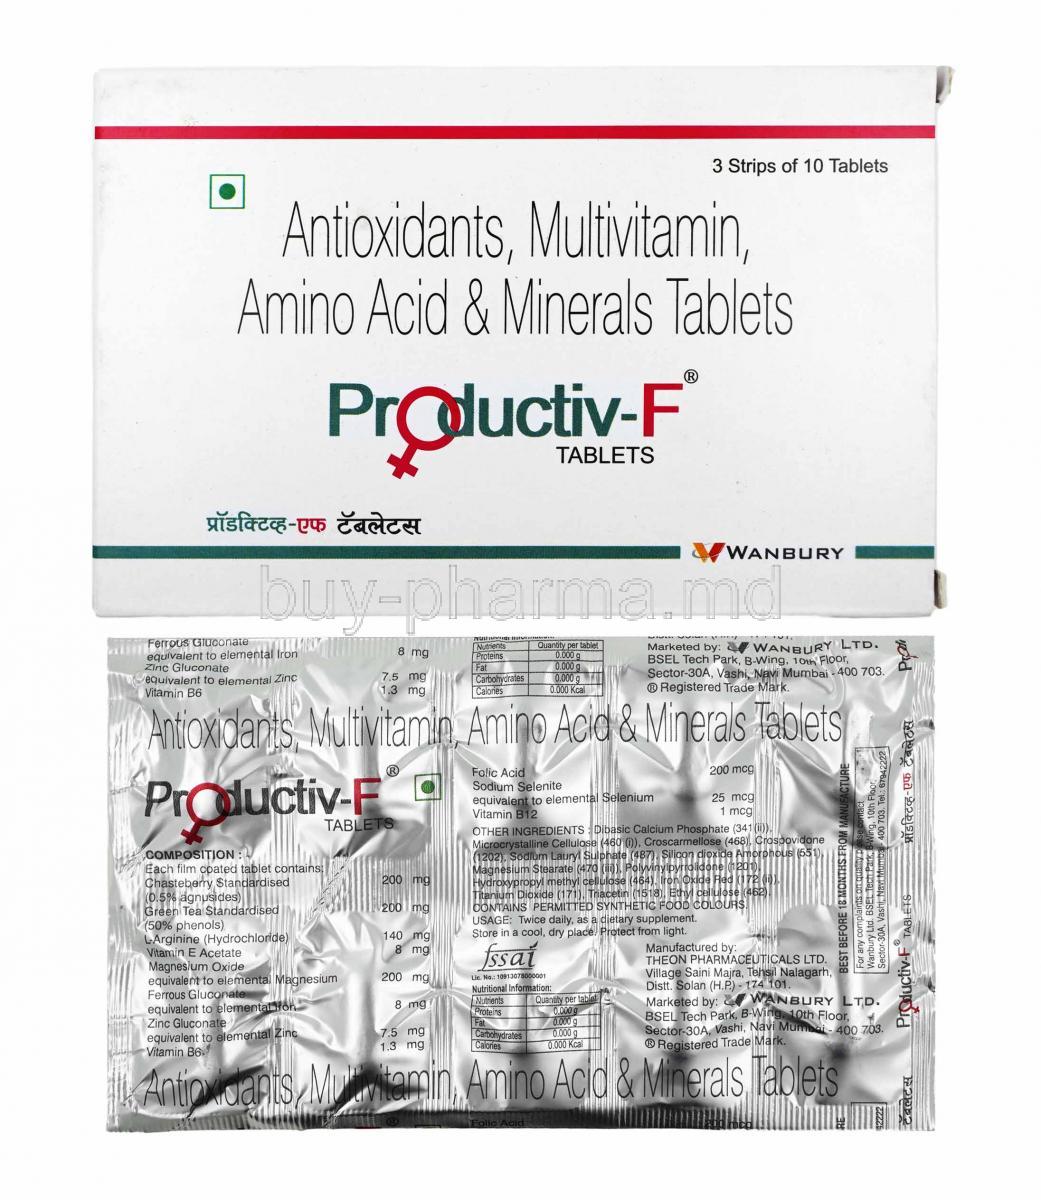 Productiv-F box and tablets